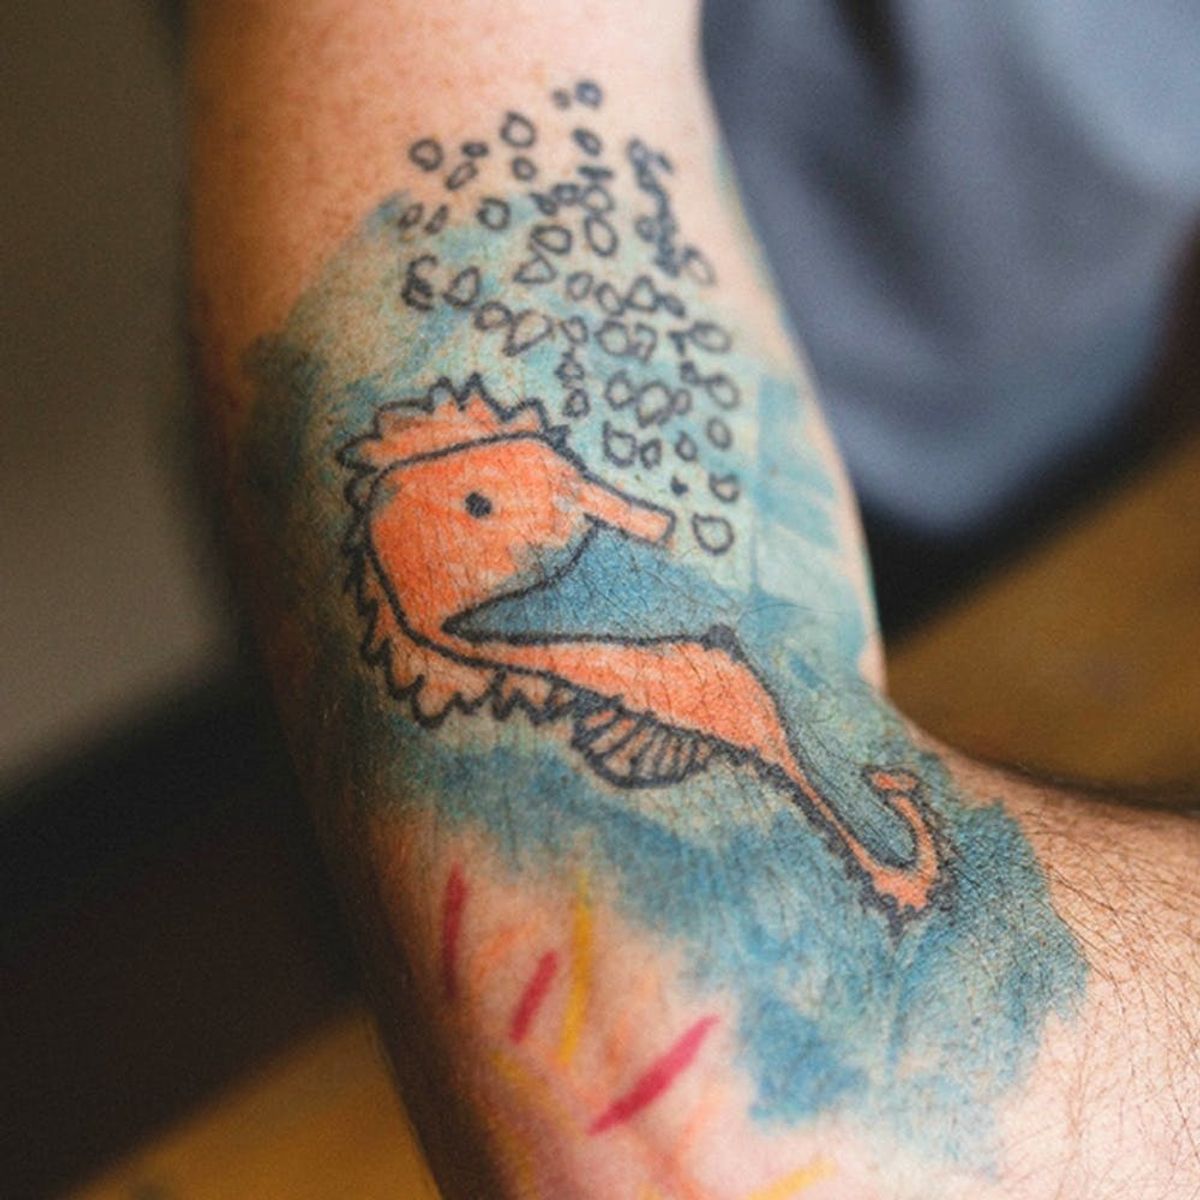 This Dad Turned His Kid’s Doodles Into Tattoos